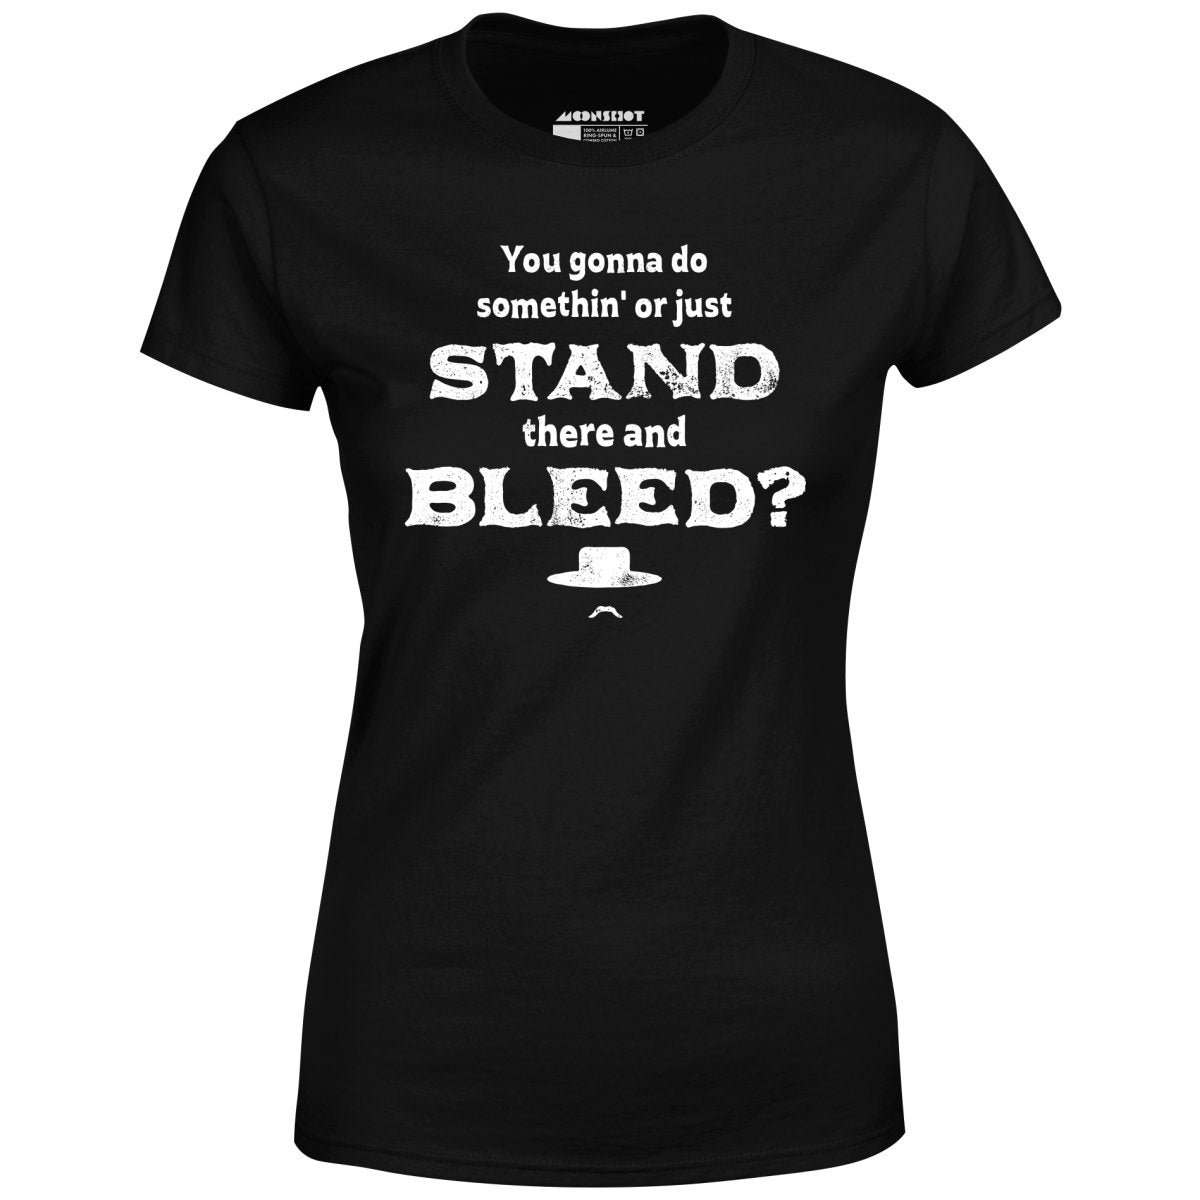 Tombstone Stand There and Bleed - Women's T-Shirt